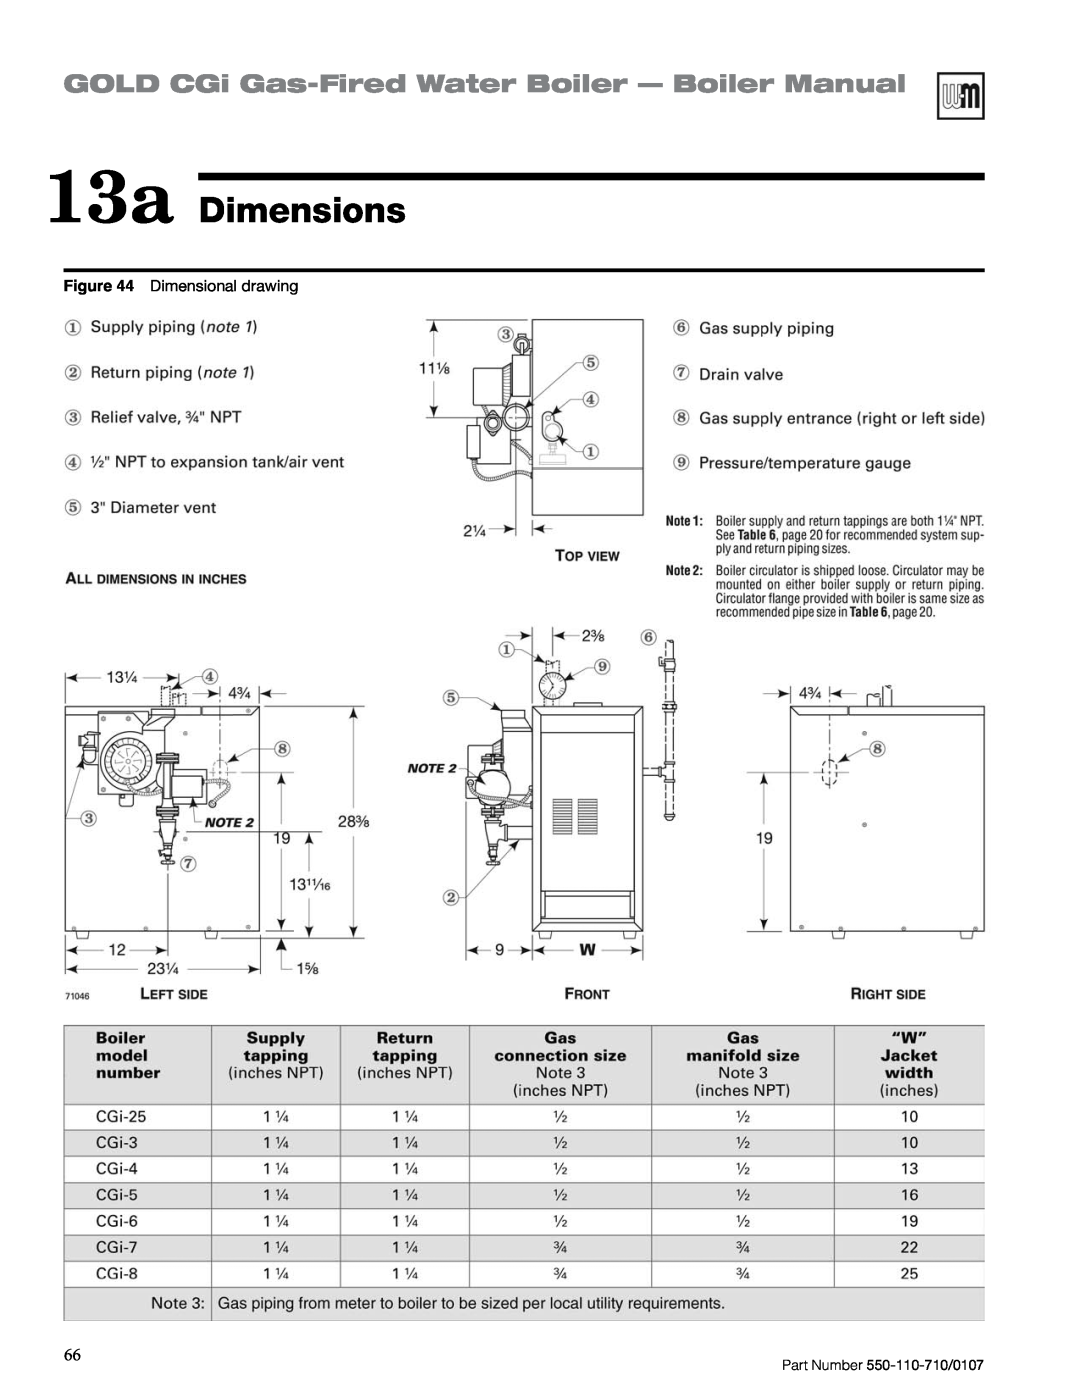 Weil-McLain Series 2 manual 13a Dimensions, GOLD CGi Gas-FiredWater Boiler — Boiler Manual, Dimensional drawing 